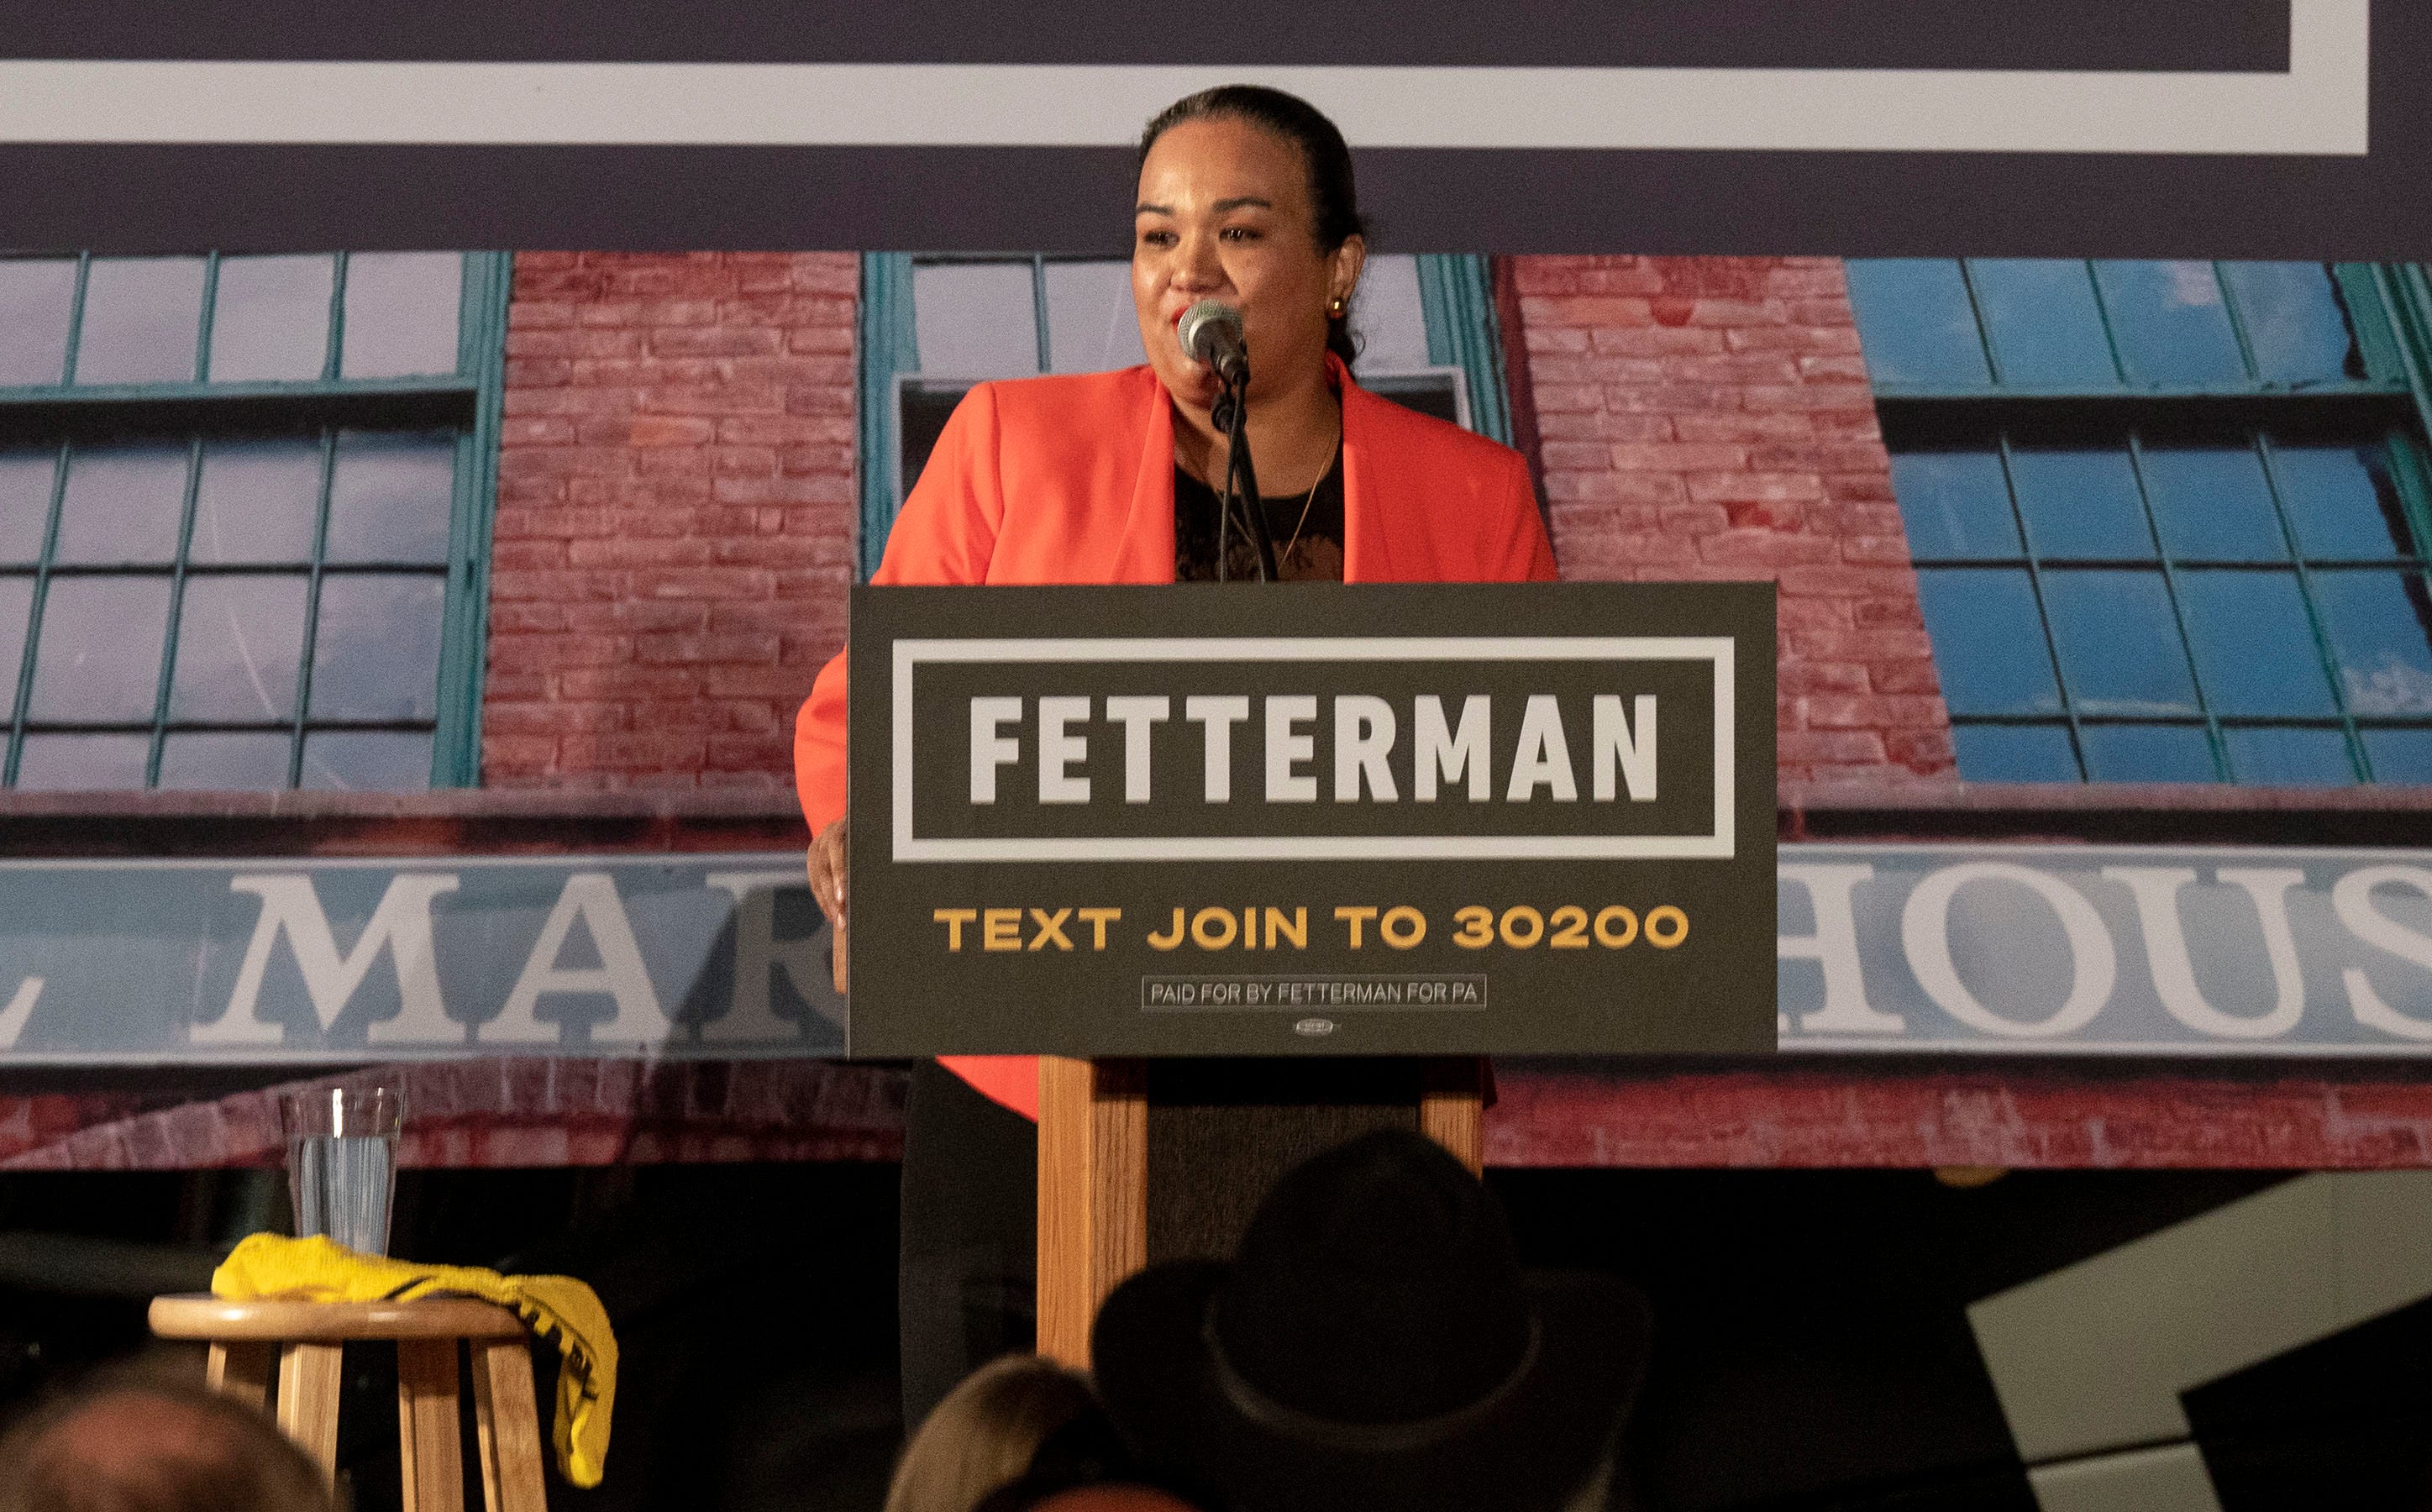 Shamaine Daniels, Congressional candidate in PA's 10th Districts, speaking at the rally for John Fetterman in York on Saturday, Oct. 8, 2022.